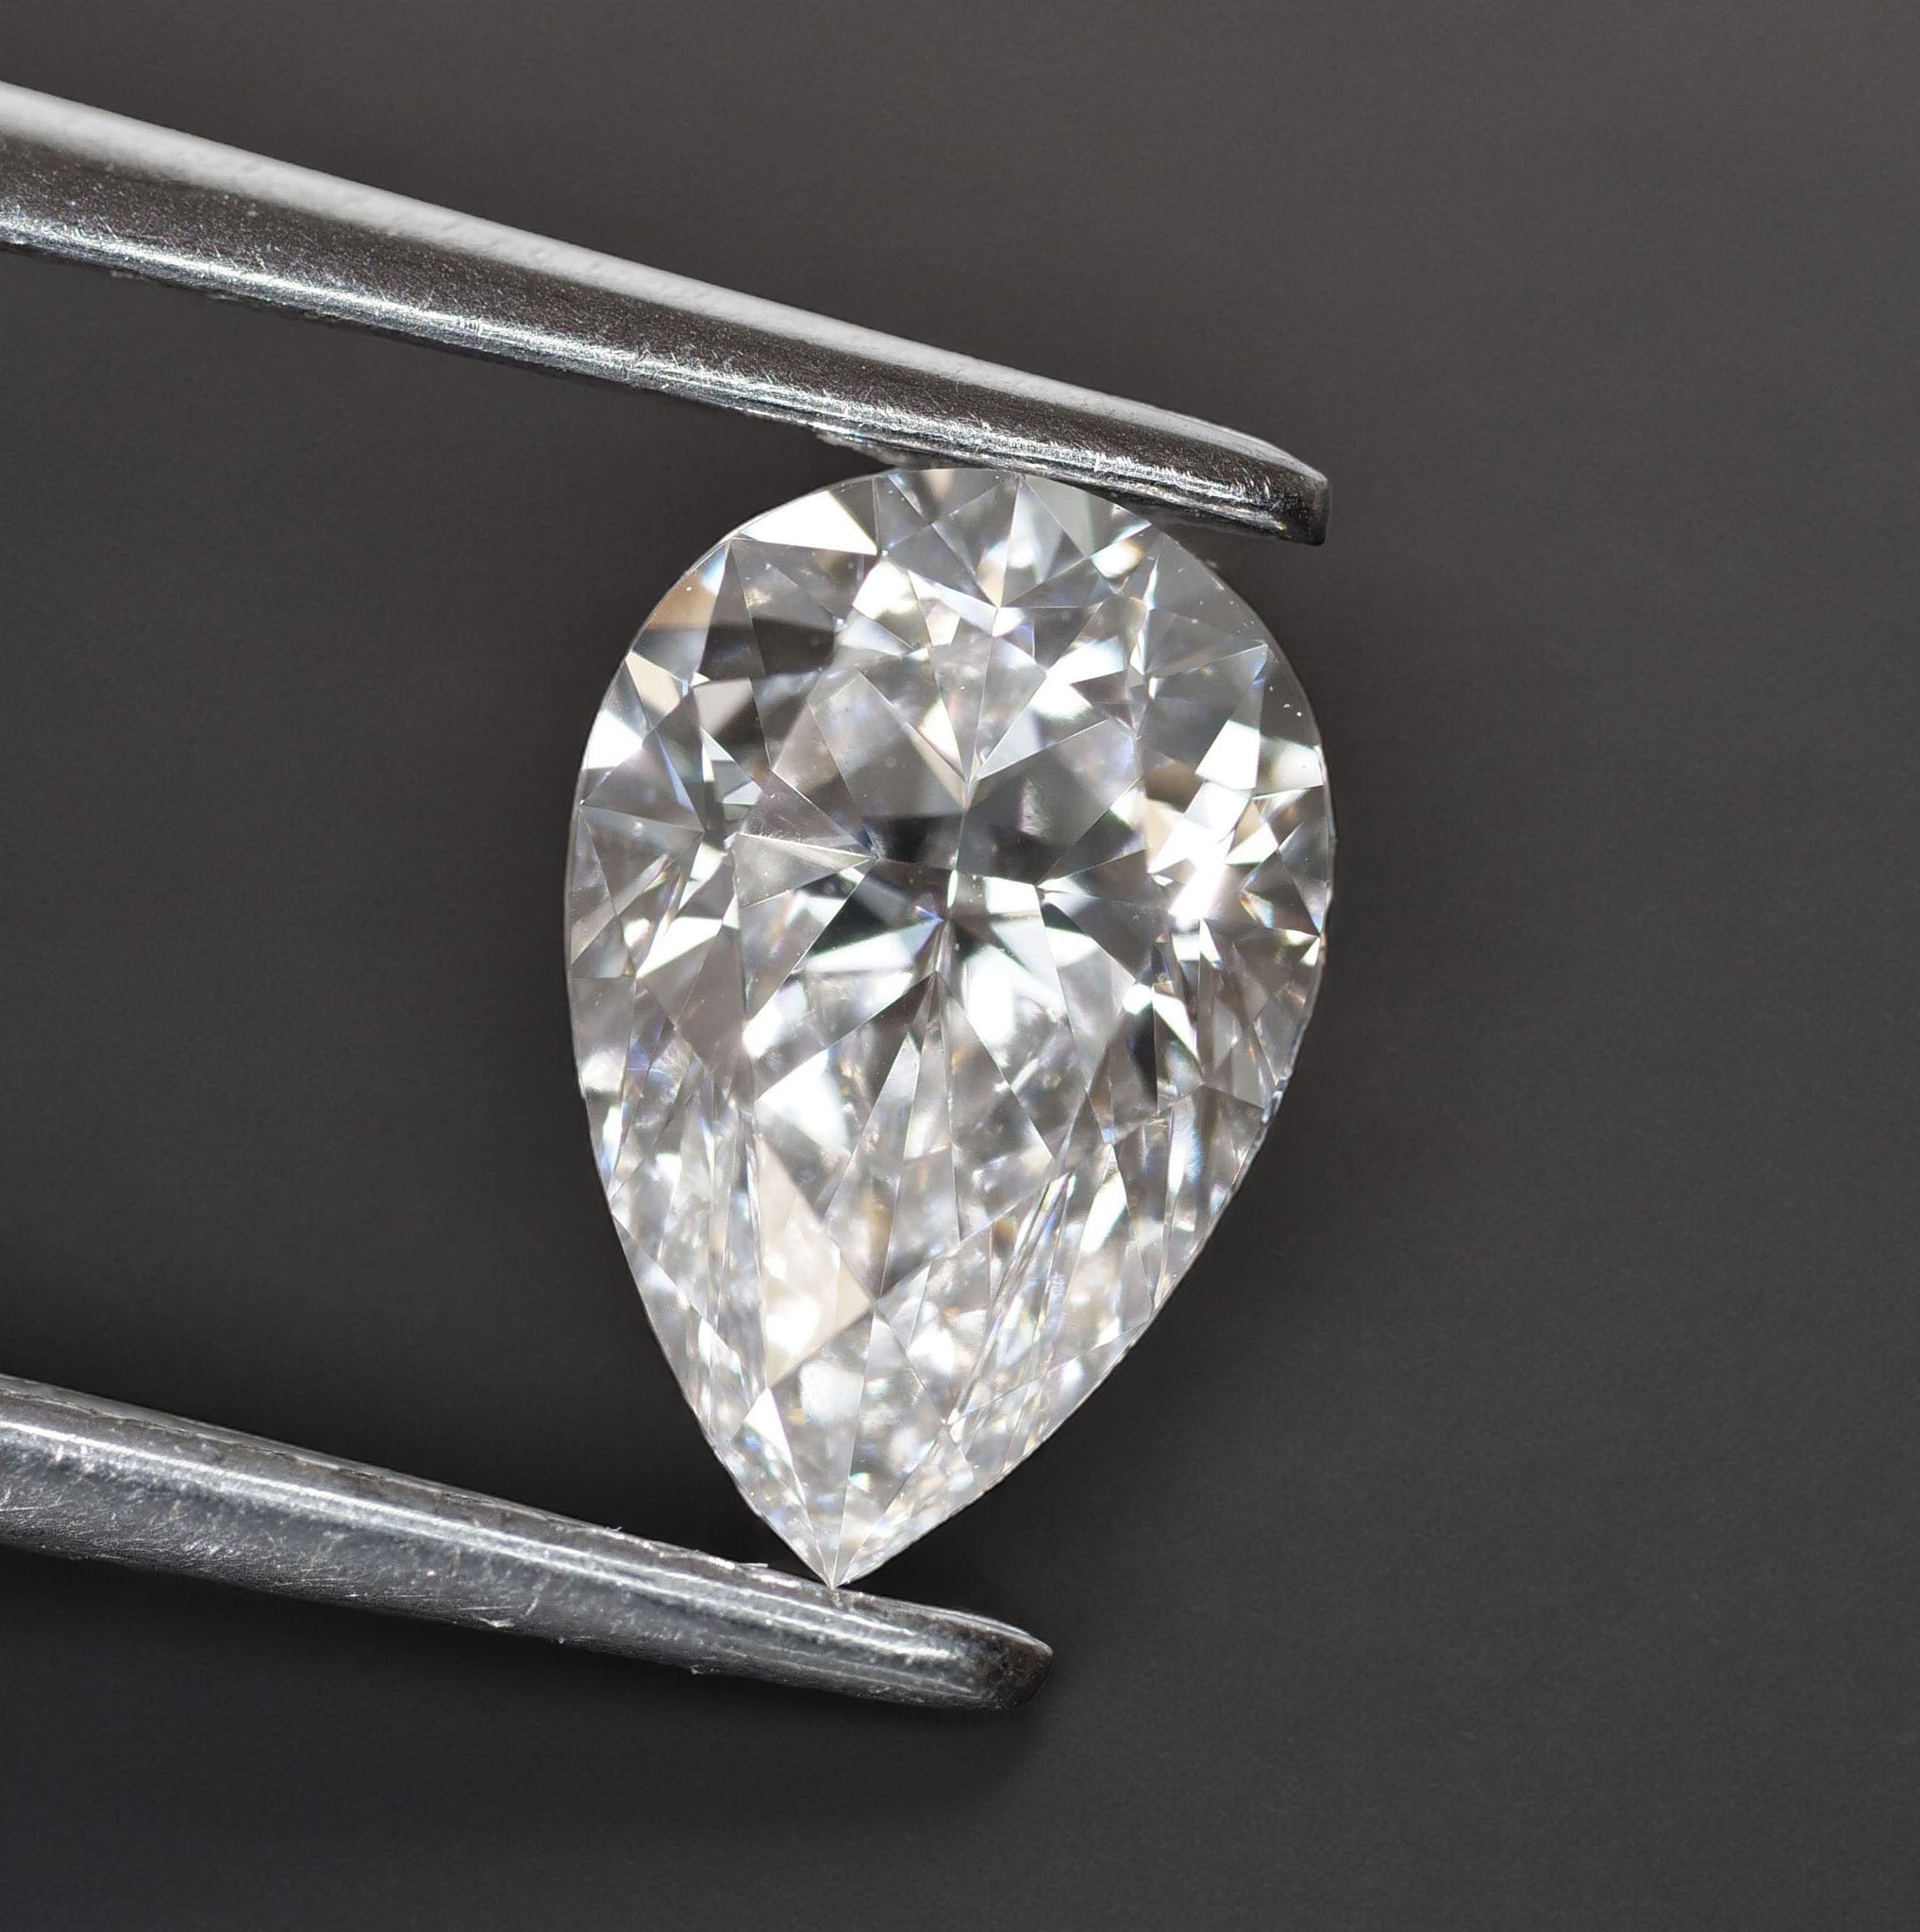 Natural diamond | GIA certified, pear cut 8x5.3 mm, D color, VS2, 0.9ct - Eden Garden Jewelry™